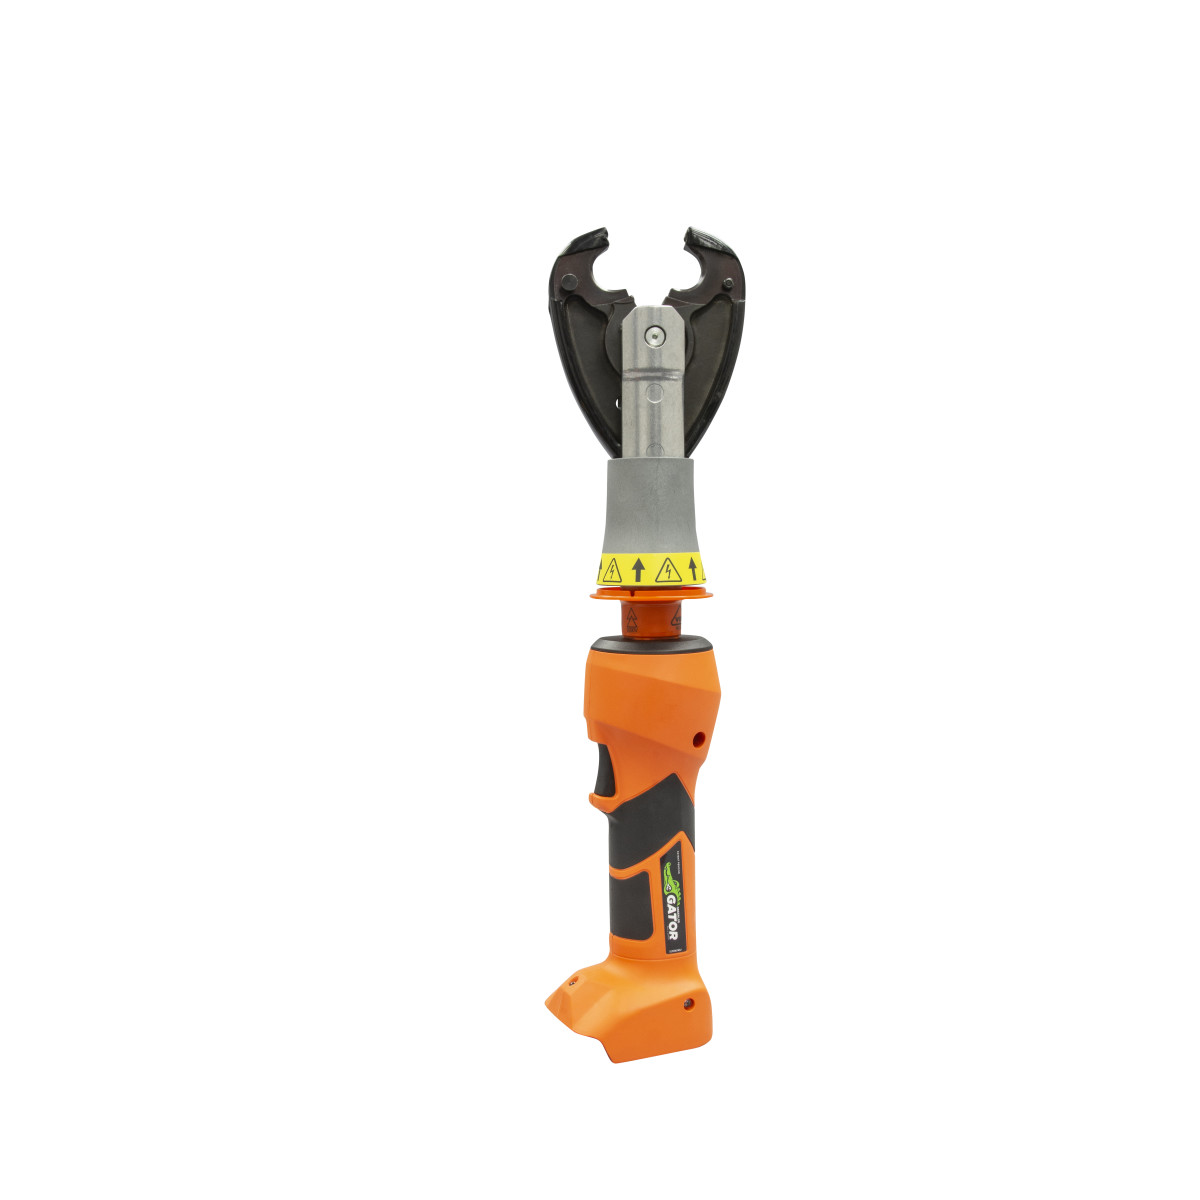 6 Ton Insulated Crimper with CJDE Head. 1000v Insulation. Brush guarded head - helps avoid accidental contact with conductors. Tri-insulation barrier - Provides three (3) layers of protection (Patent Pending). 360° Rotating head  - For improved agility in confined work spaces. Double -tap safety feature option -Prevents unintentional operation. Bluetooth® communication